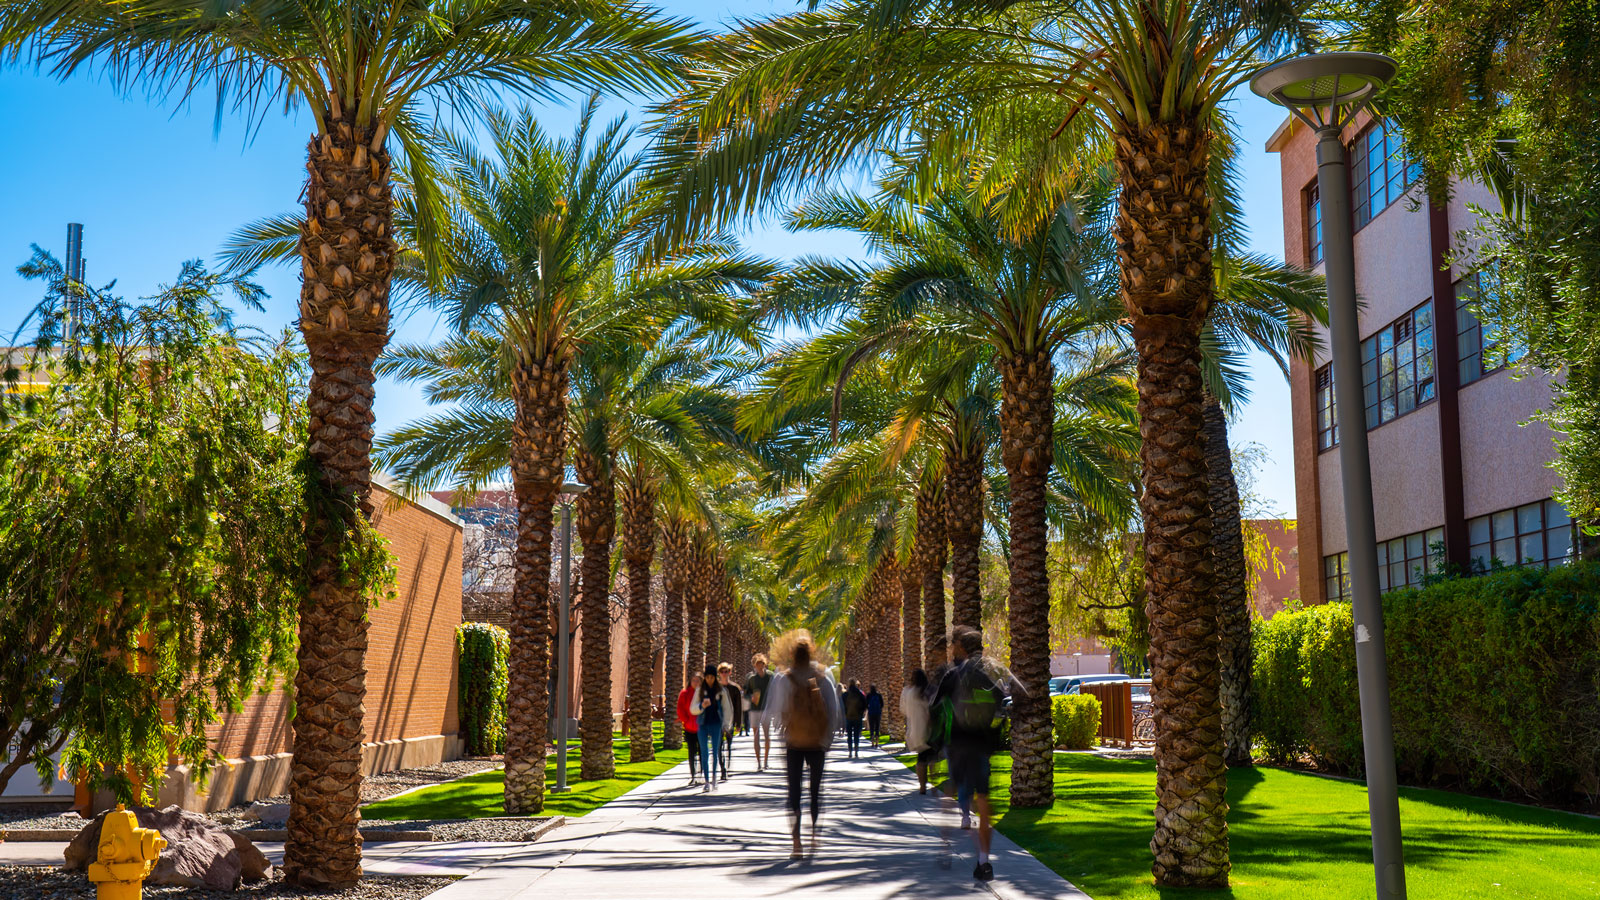 Students walk through path lined with palm trees on Arizona State University's campus